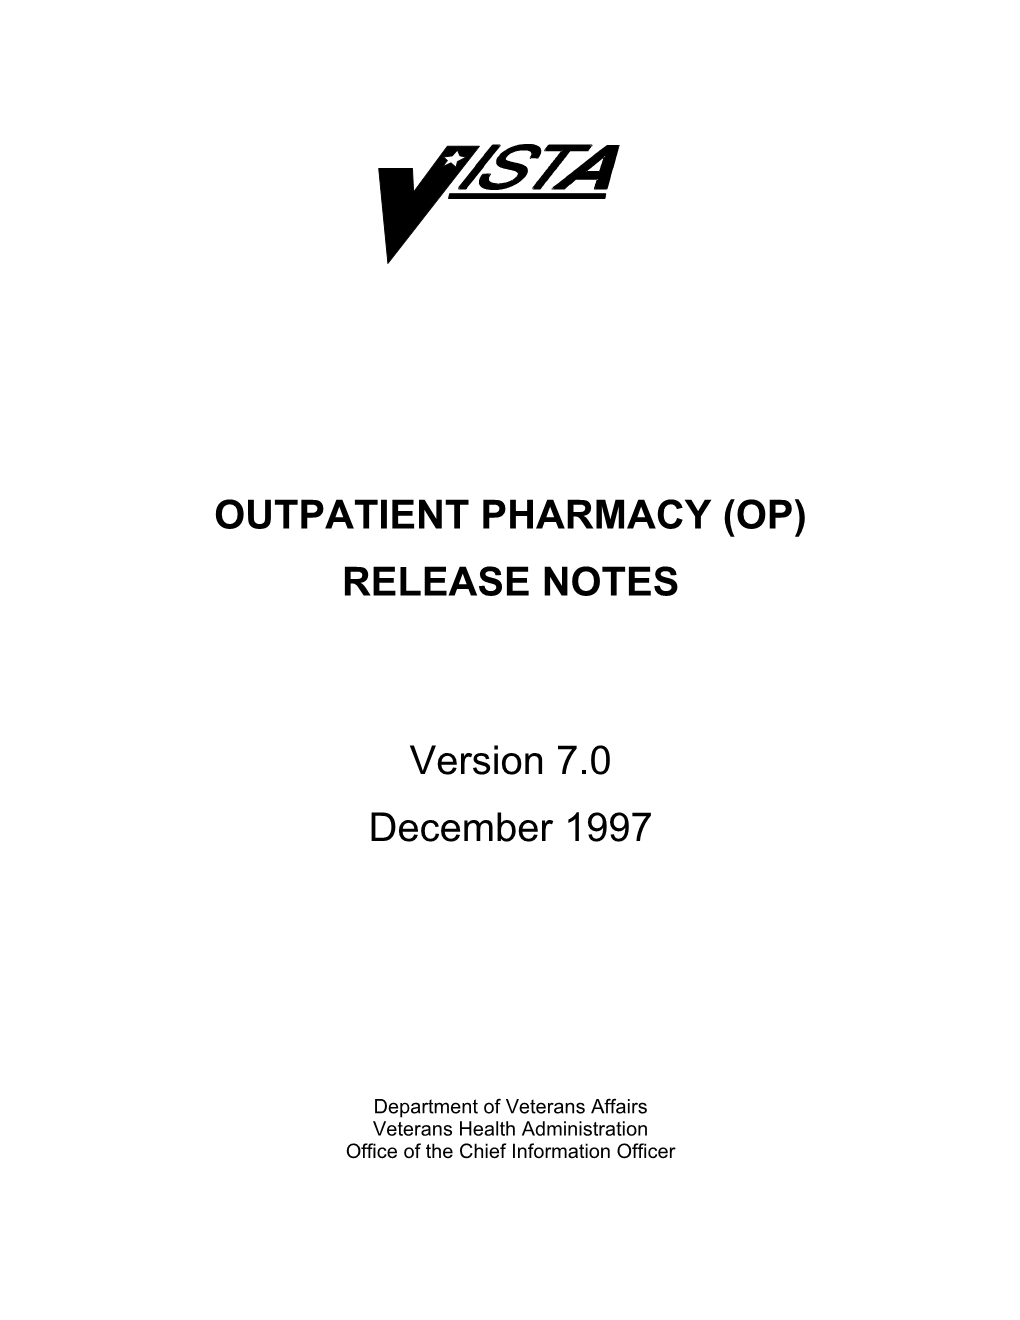 Outpatient Pharmacy (Op)